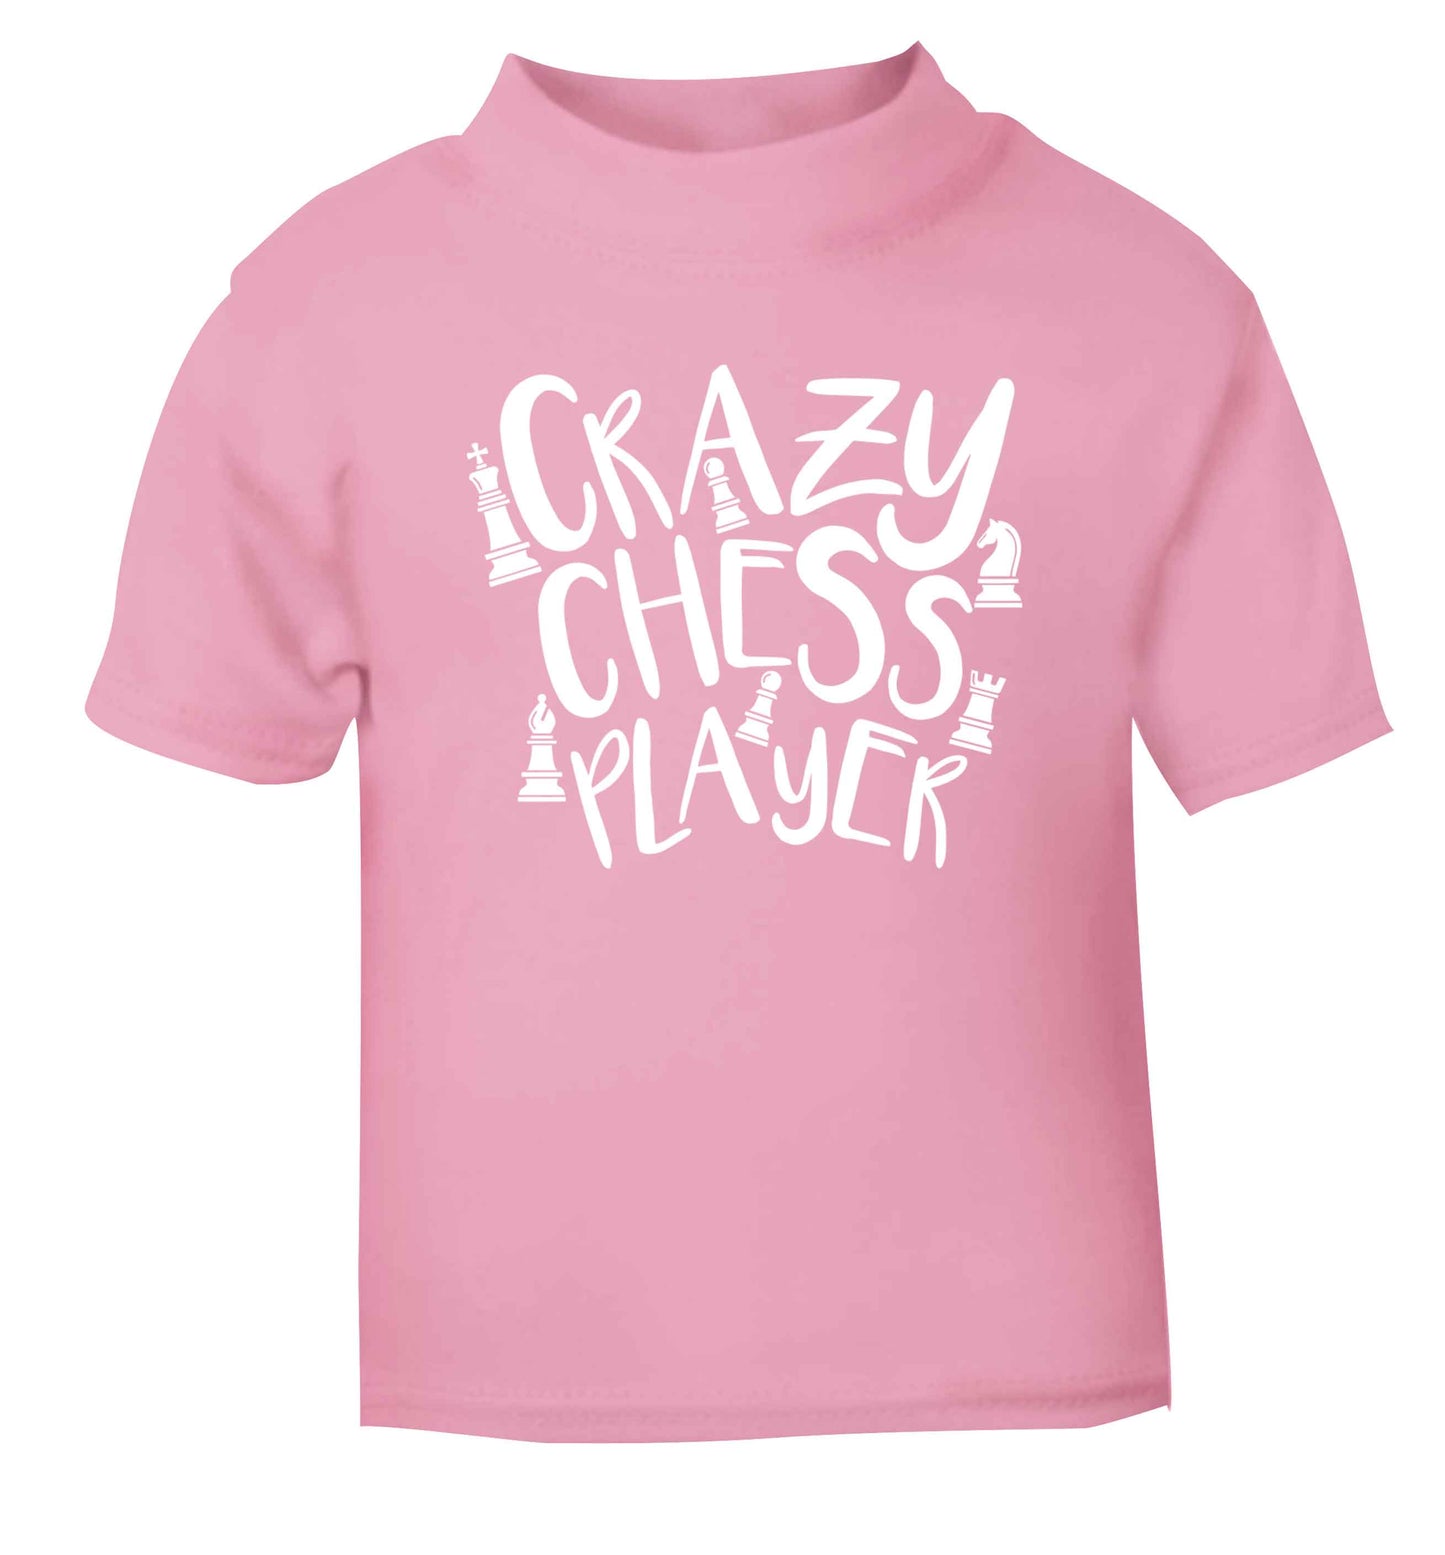 Crazy chess player light pink Baby Toddler Tshirt 2 Years